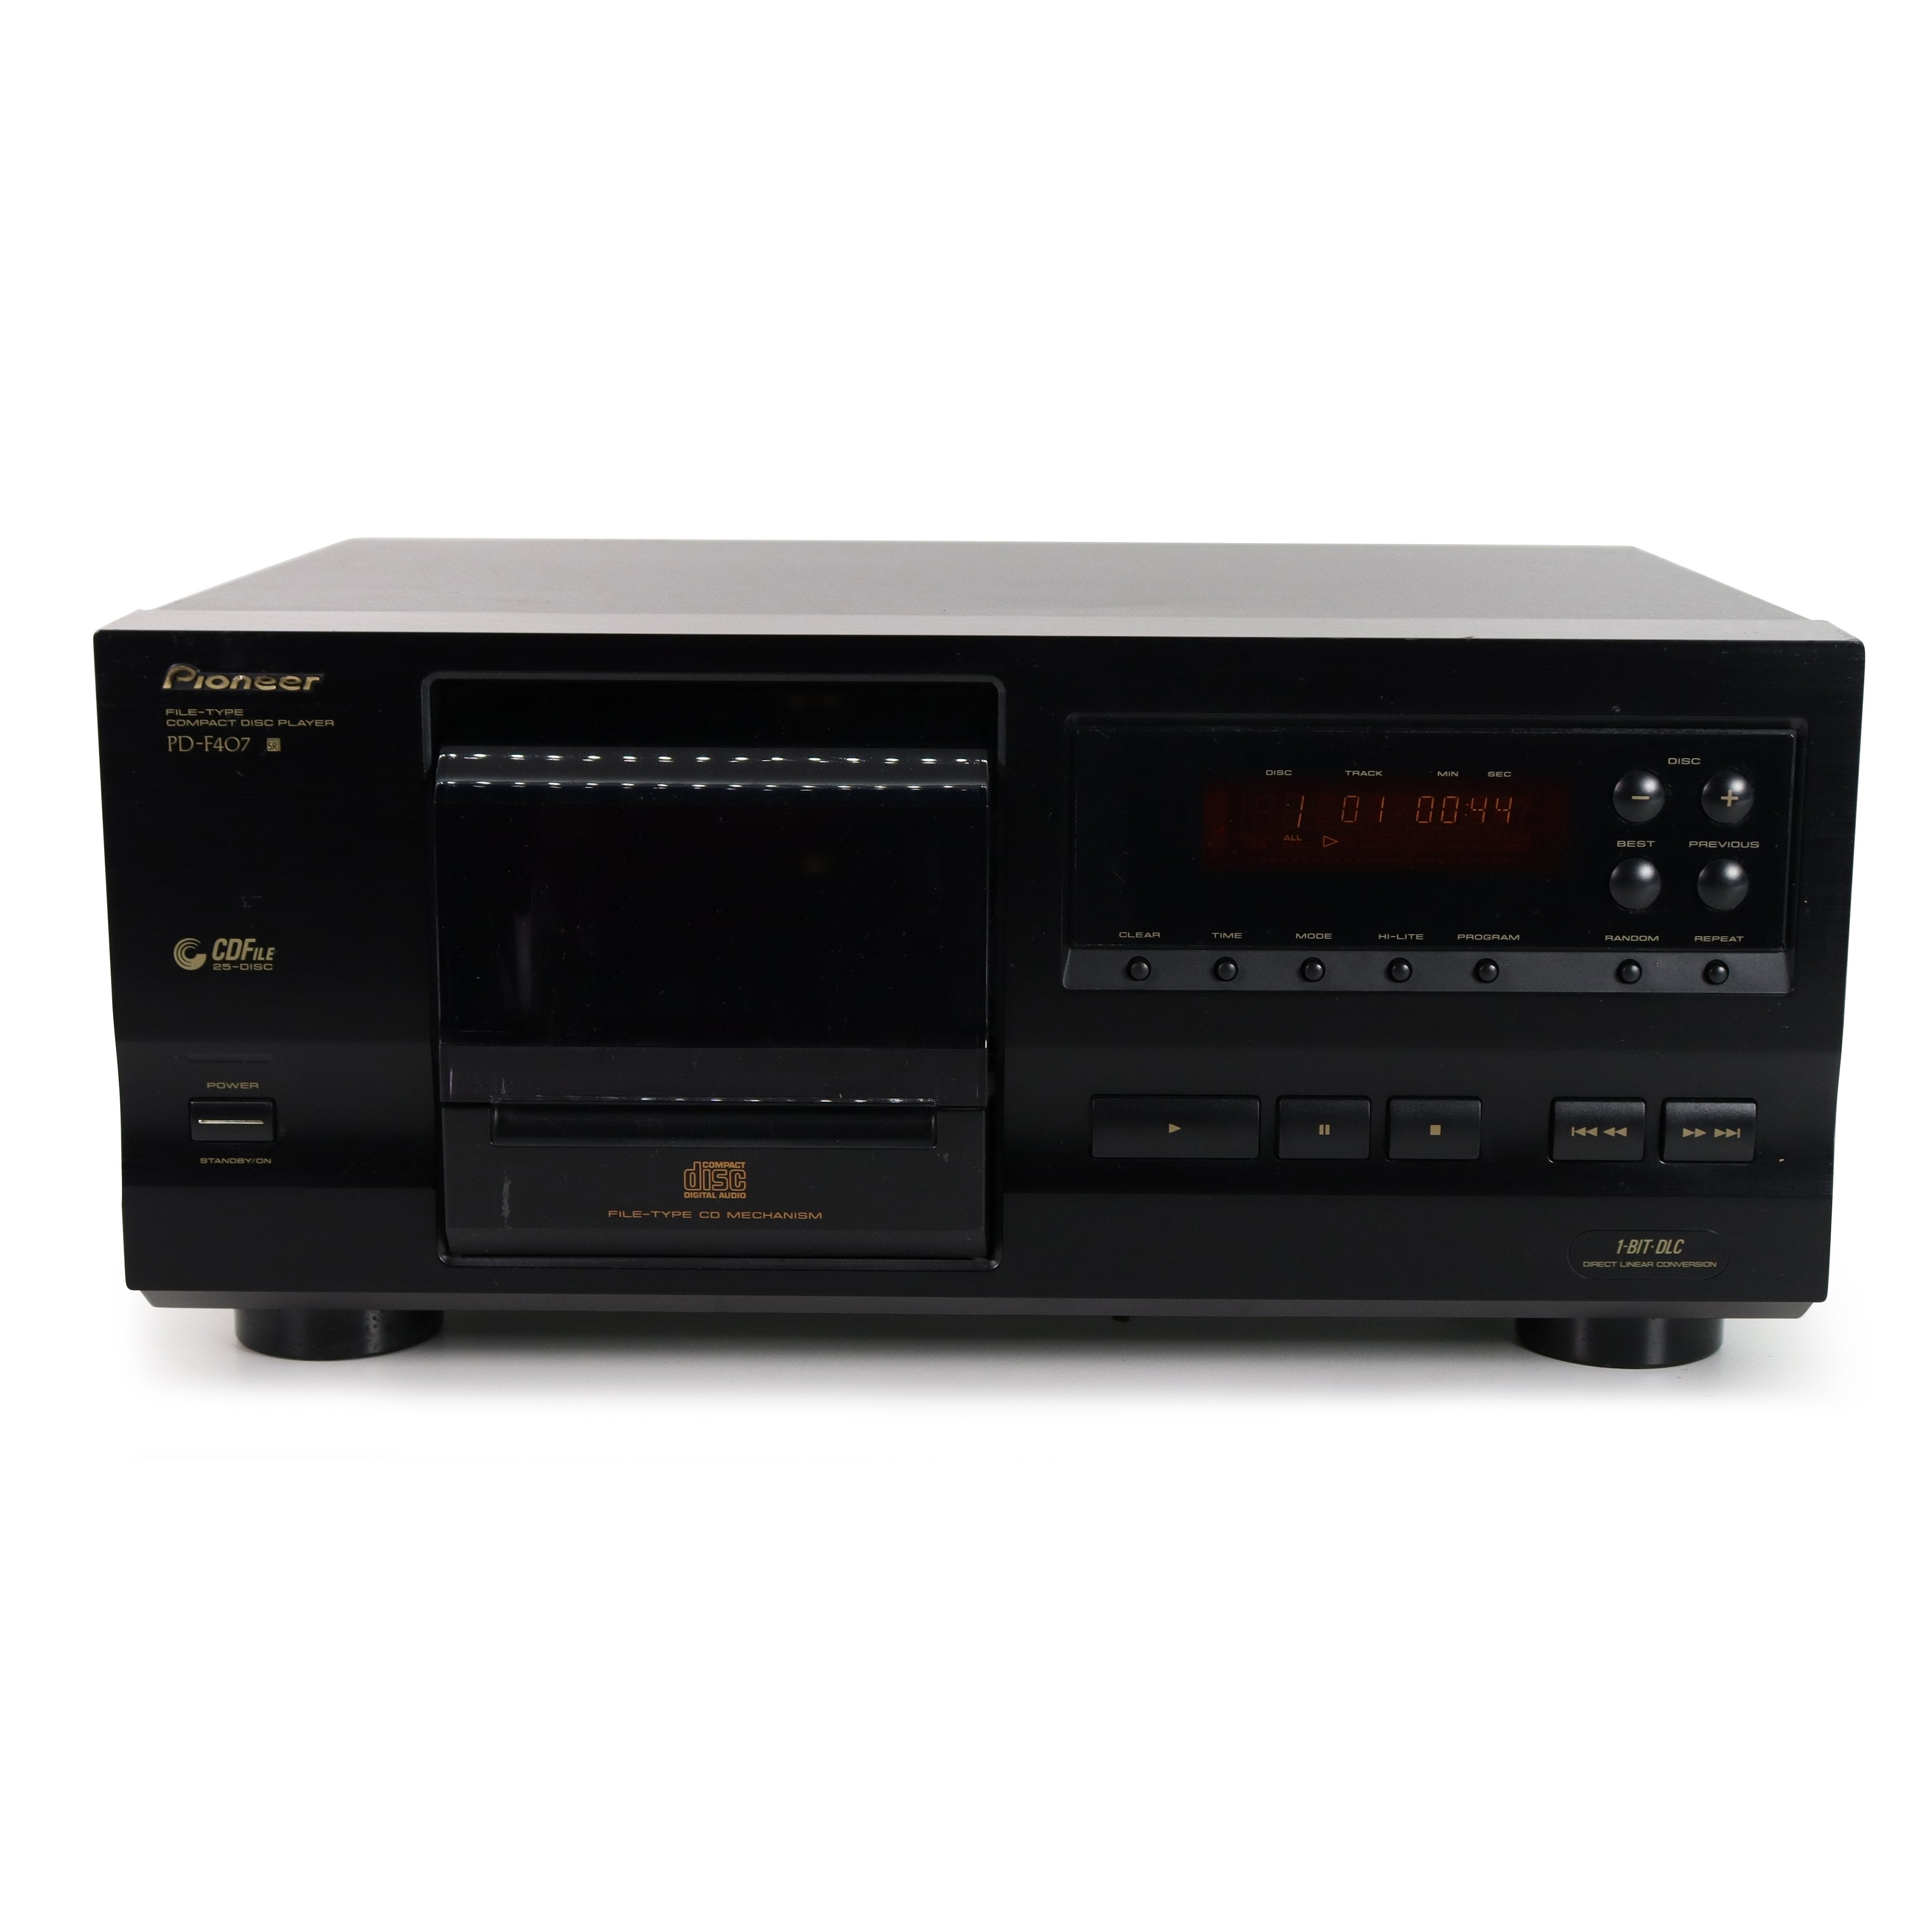 Pioneer PD-F407 25-Disc File-Type Digital CD Changer Player with Original  Box